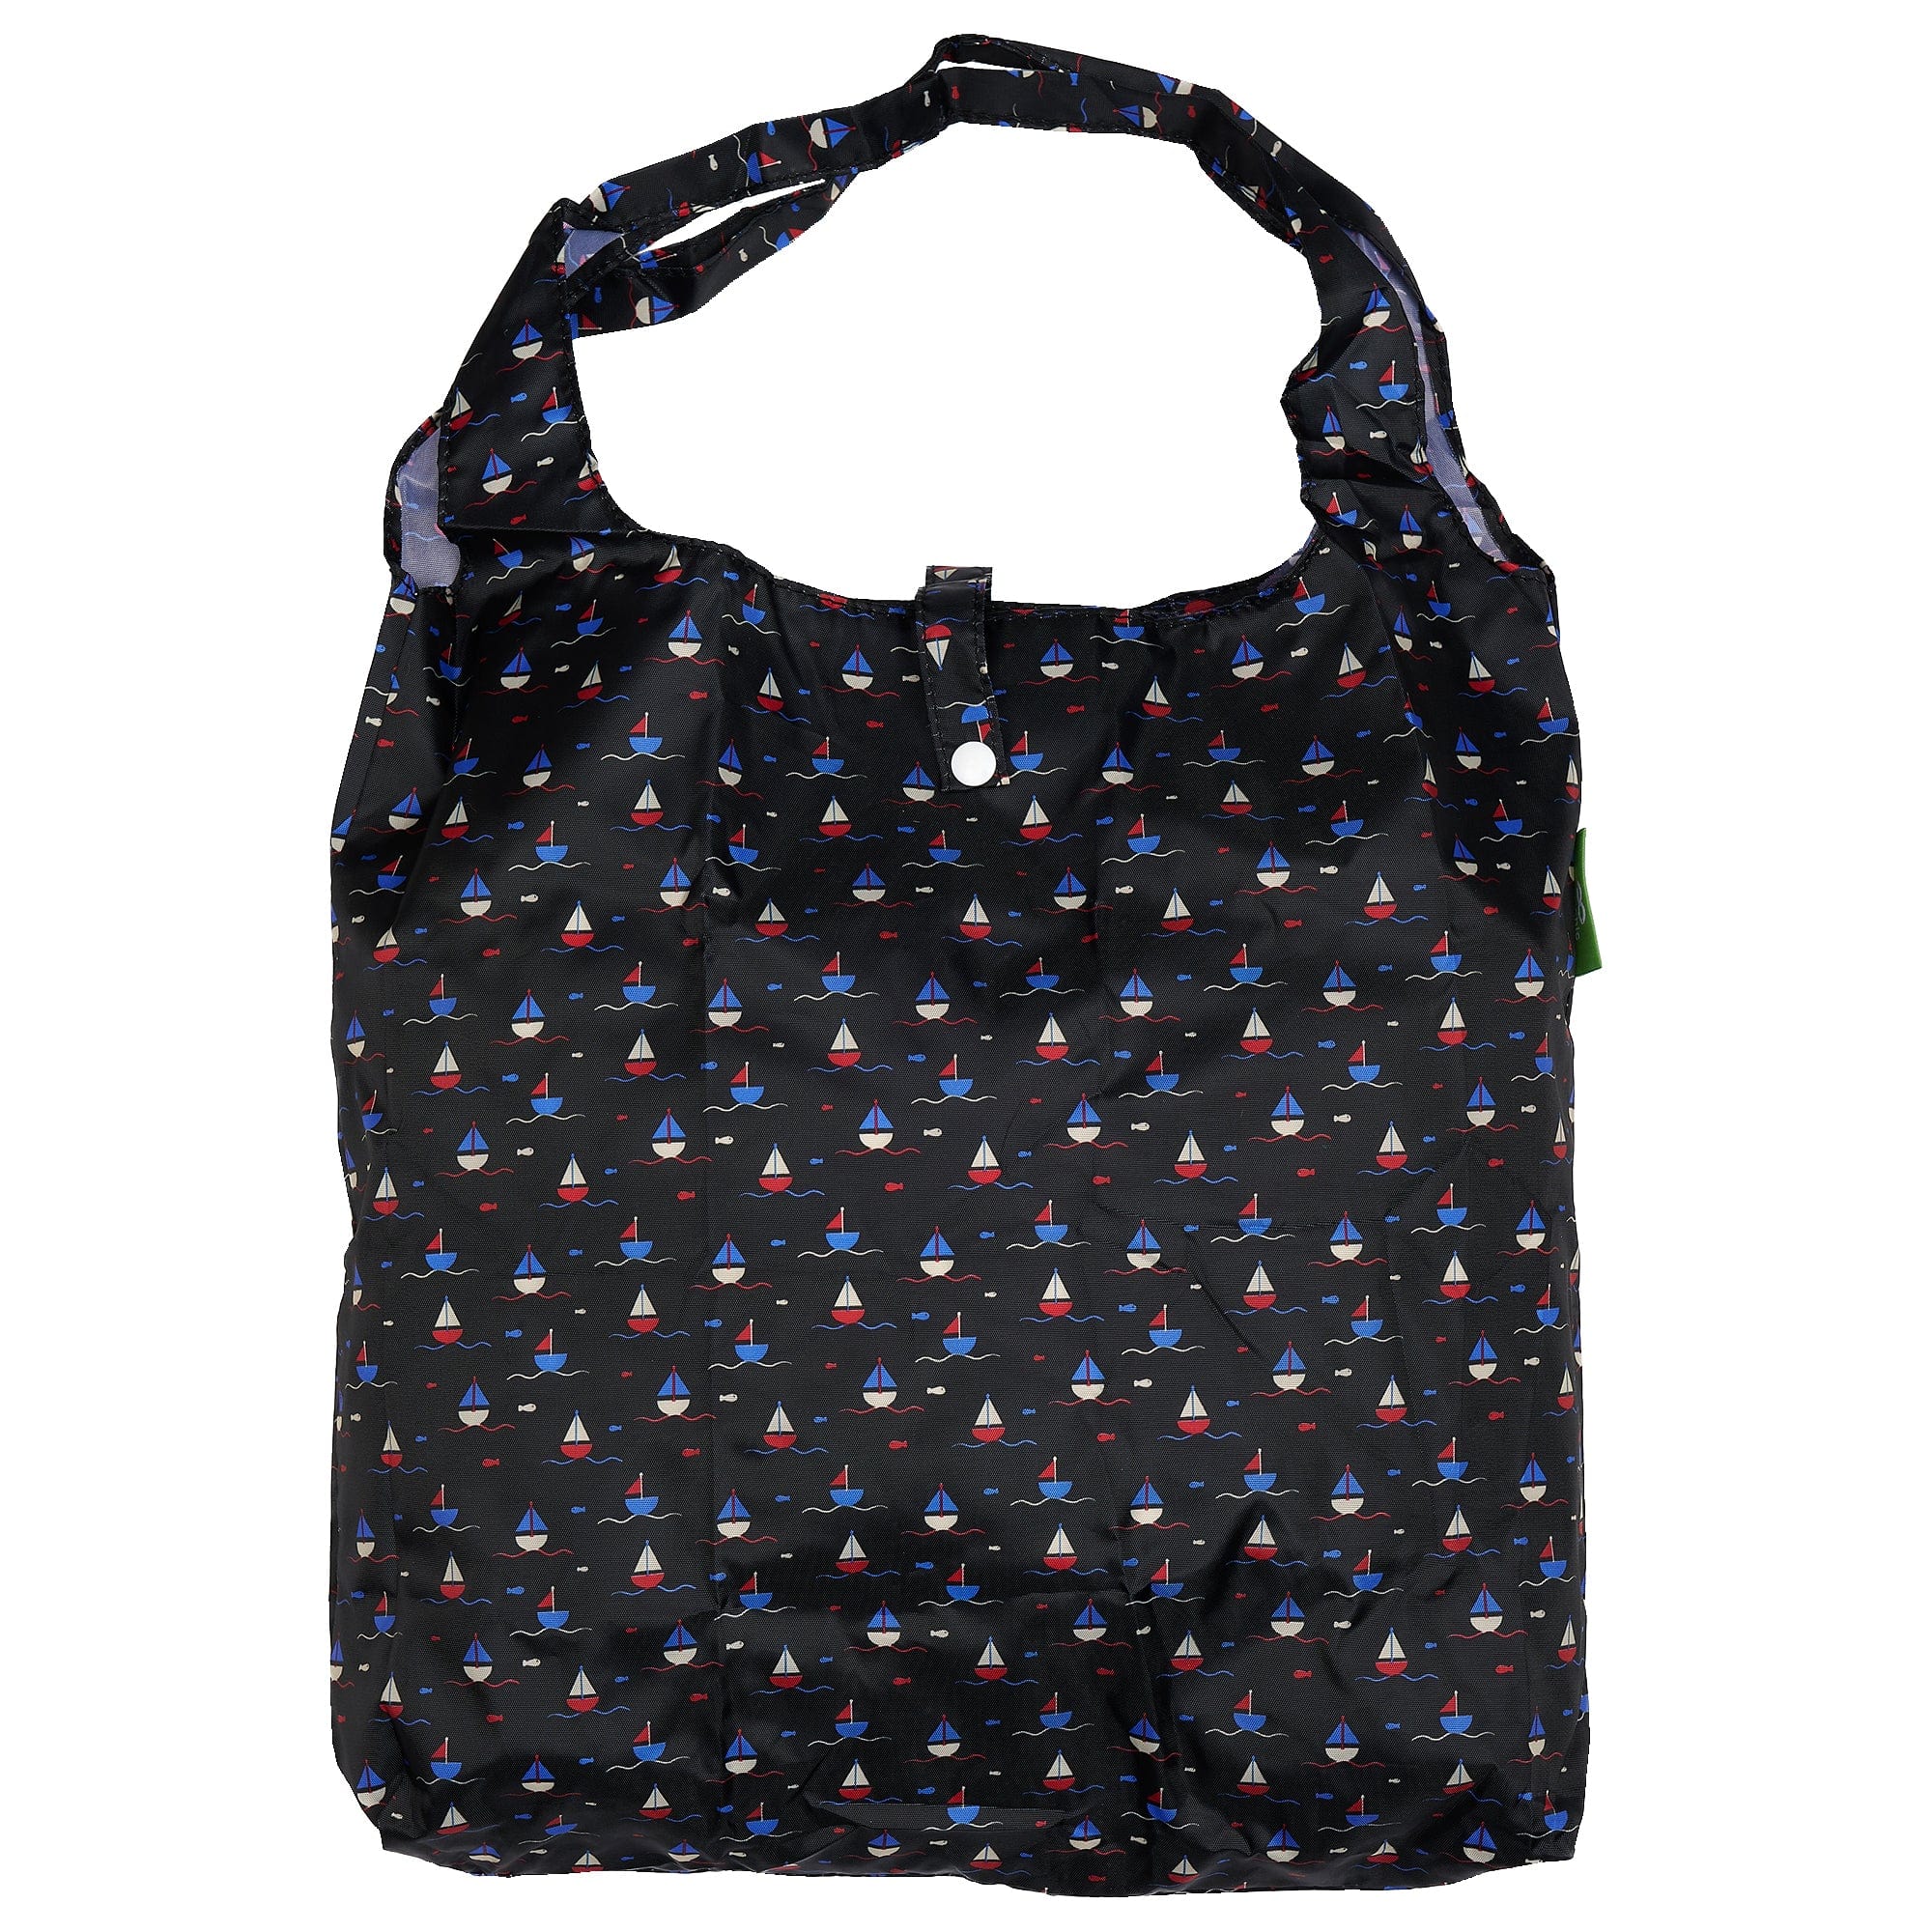 Eco Chic Navy Eco Chic Lightweight Foldable Reusable Shopping Bag Yachts